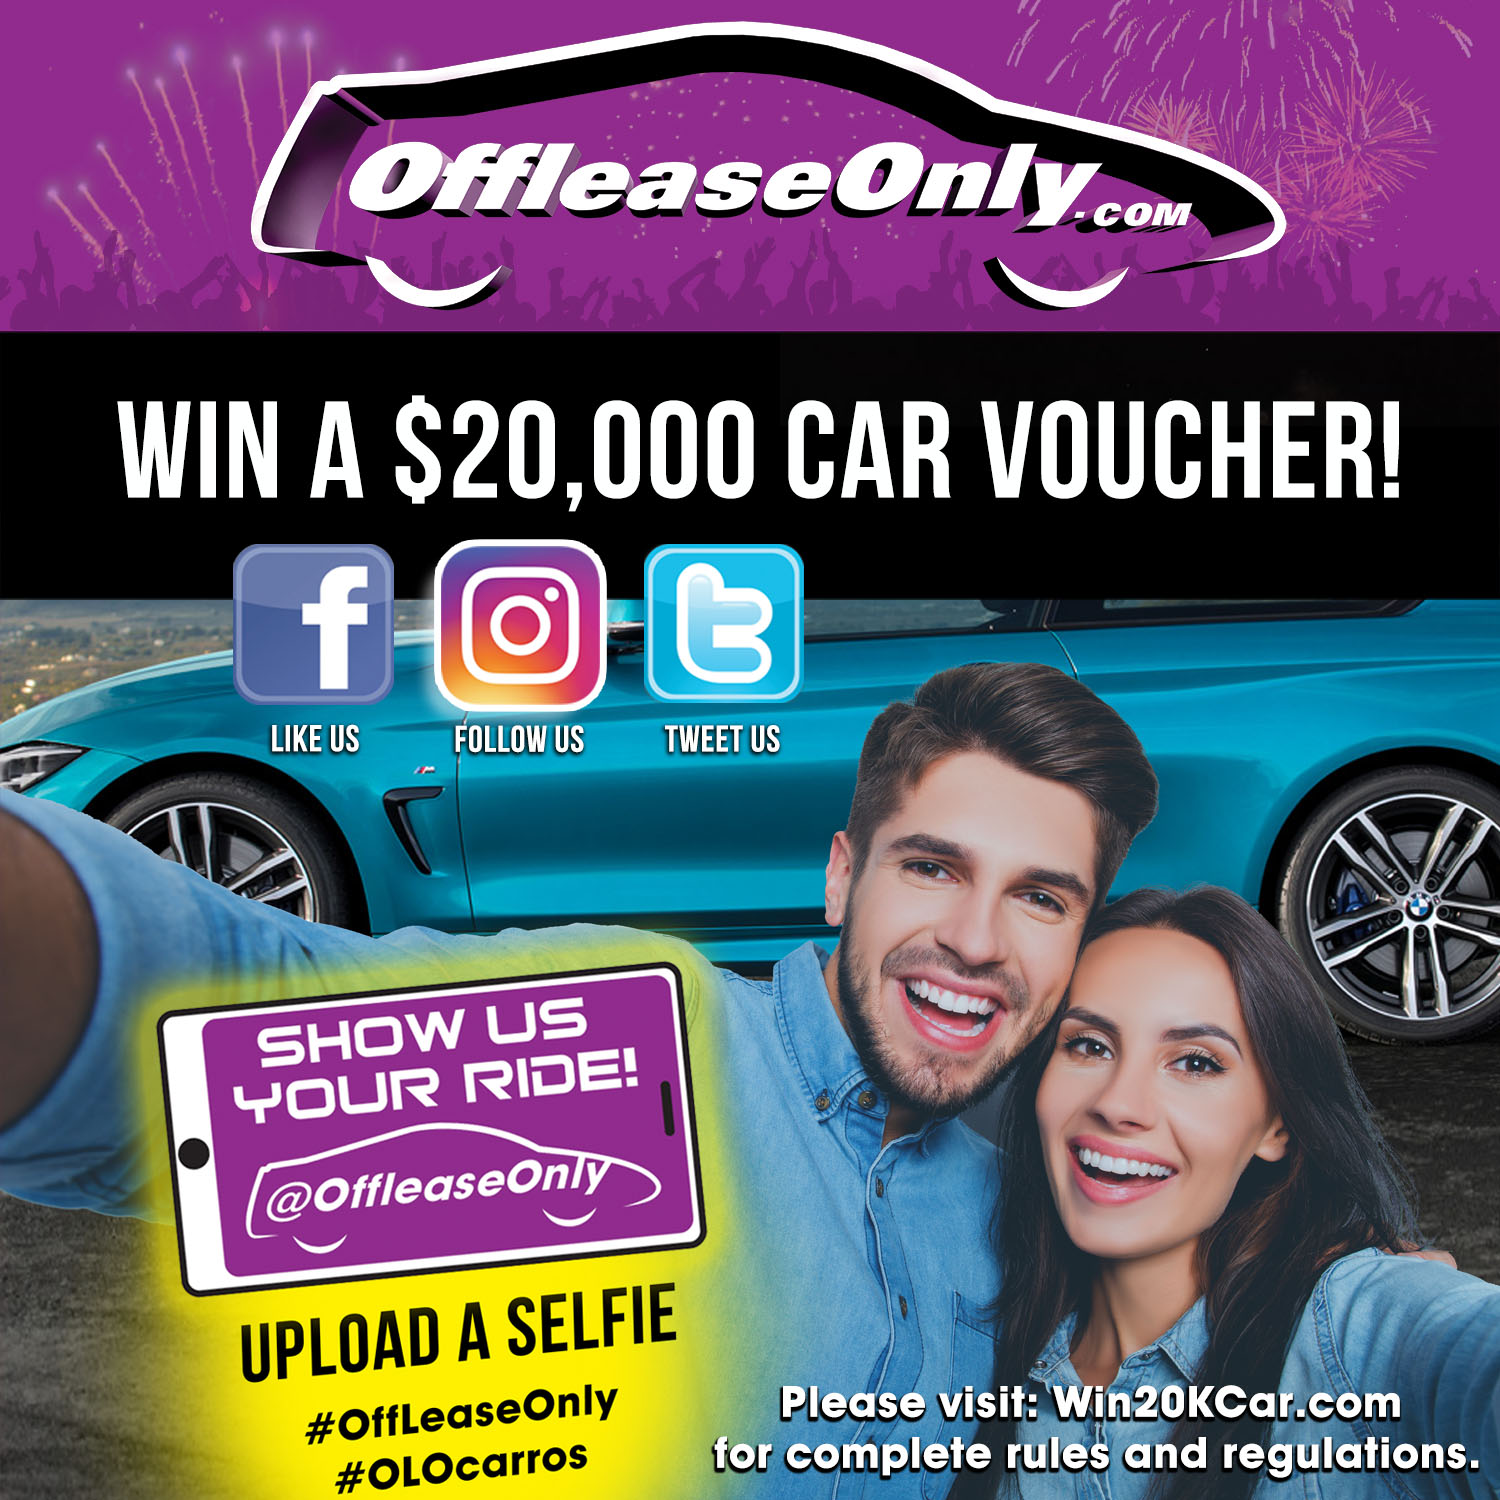 Upload a selfie to win a $20k Off Lease Only car voucher!!!